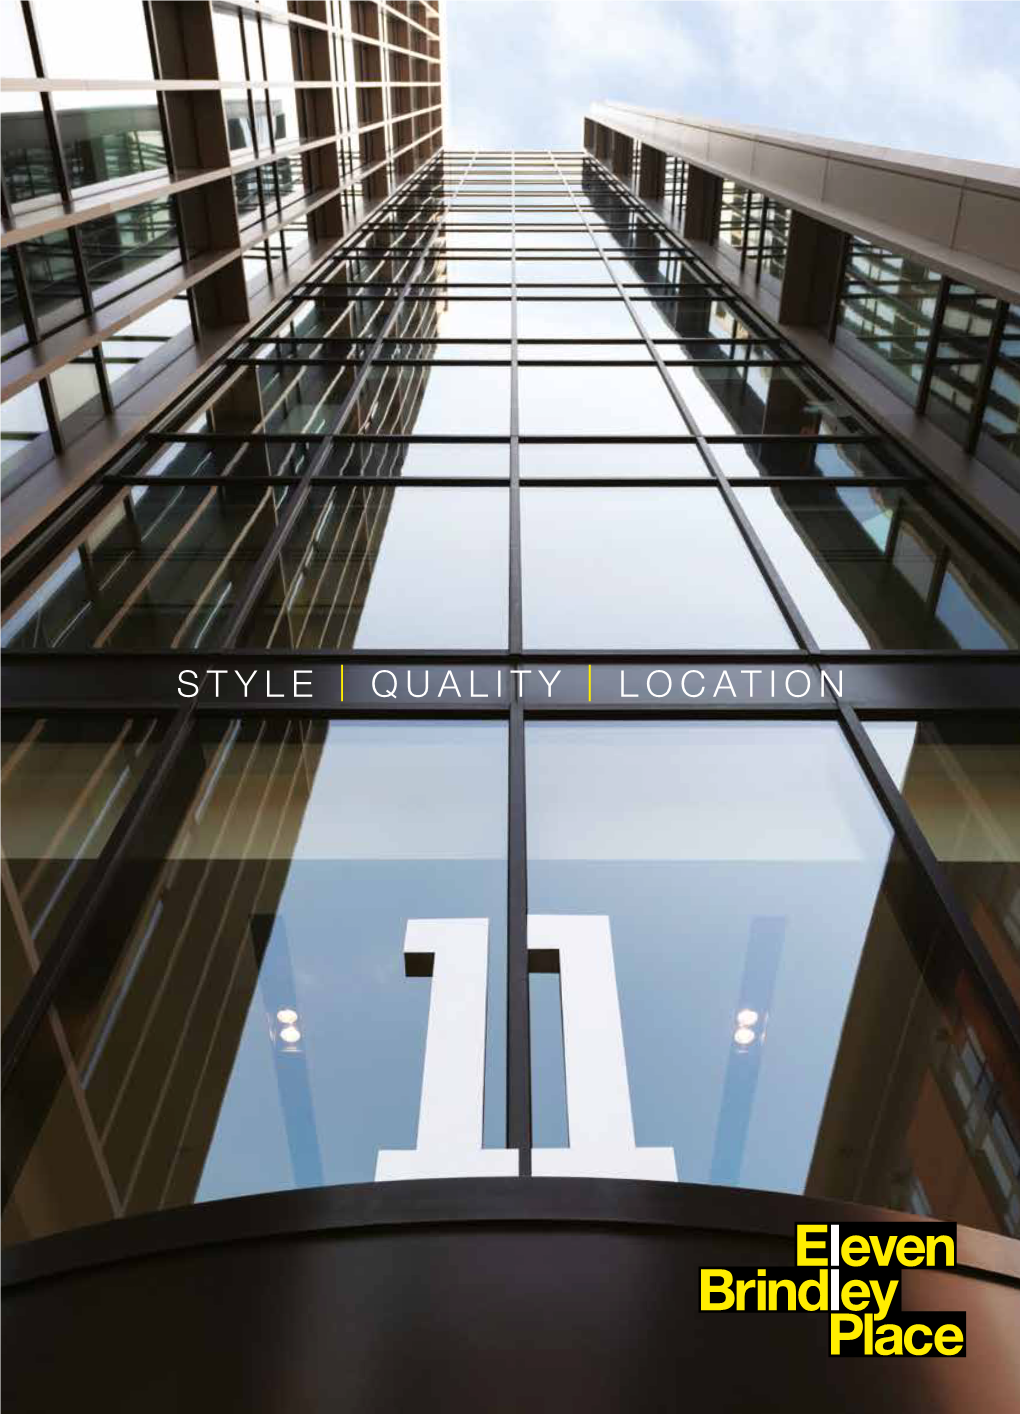 Style | Quality | Location Award Winning Flexible Space Overview